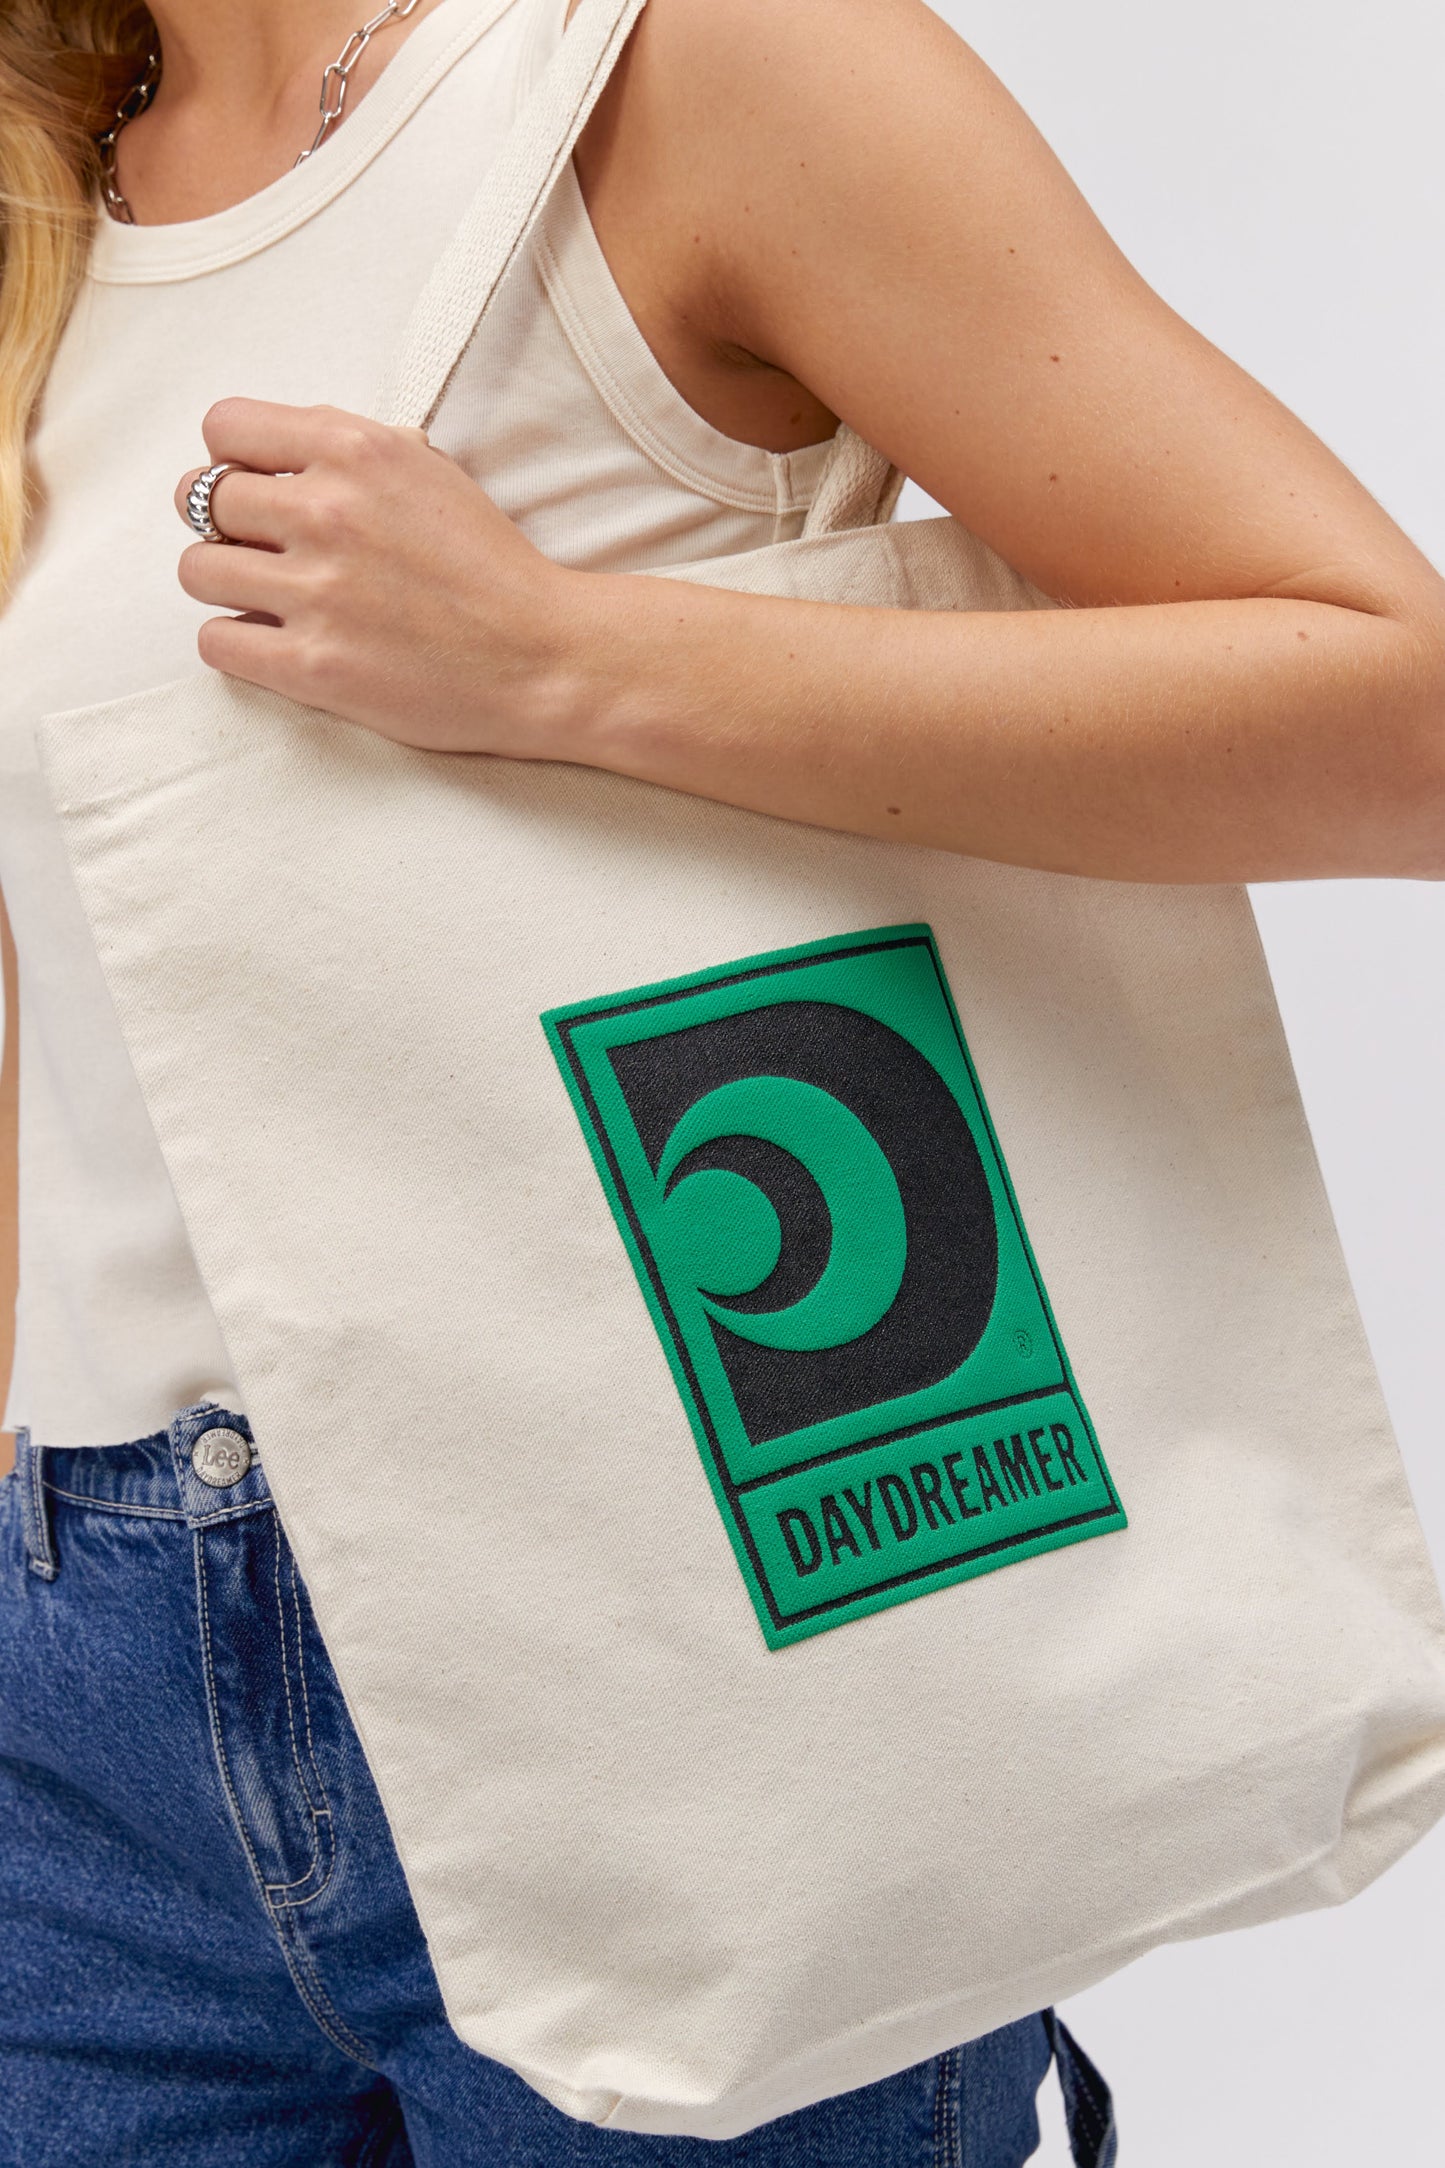 BLONDE MODEL HOLDING CANVA TOTE WITH GREEN DAYDREAMER LOGO IN CENTER